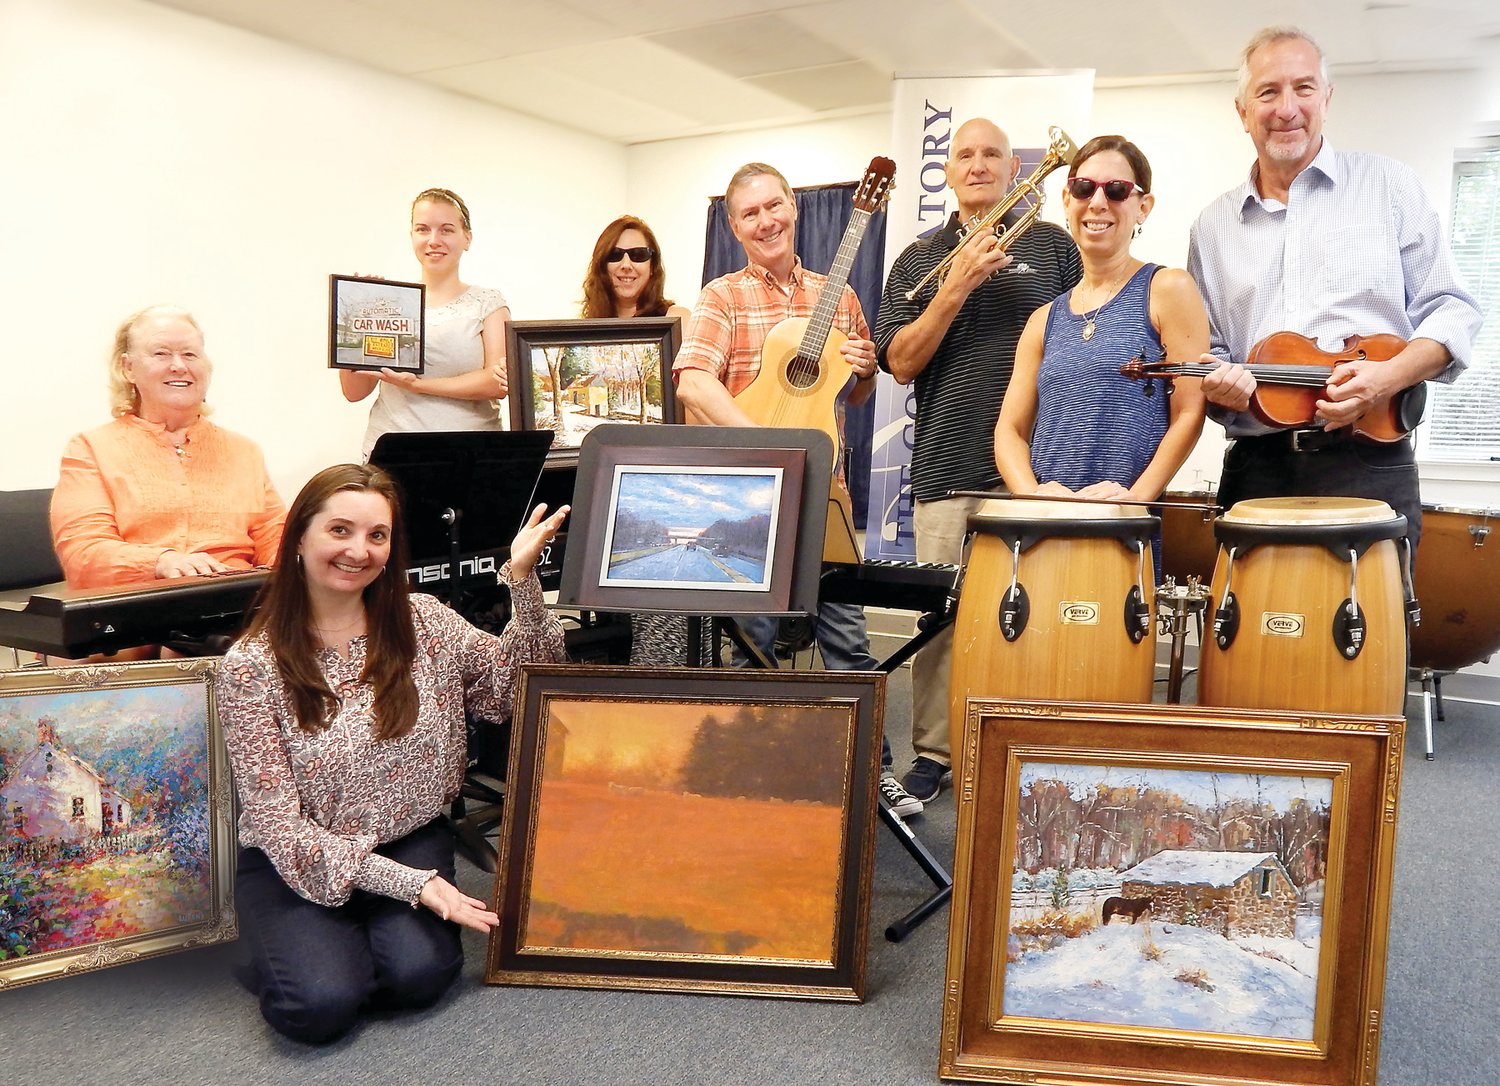 Seated from left are artist Betty Minnucci and Executive Director Rachael Gallagher. Standing from left are Program Manager Casey Bonner, Operations Manager Melanie Boyd, artist George Thompson, show treasurer Mike Minnucci, and artists Emily Thompson and Jas Szygiel.